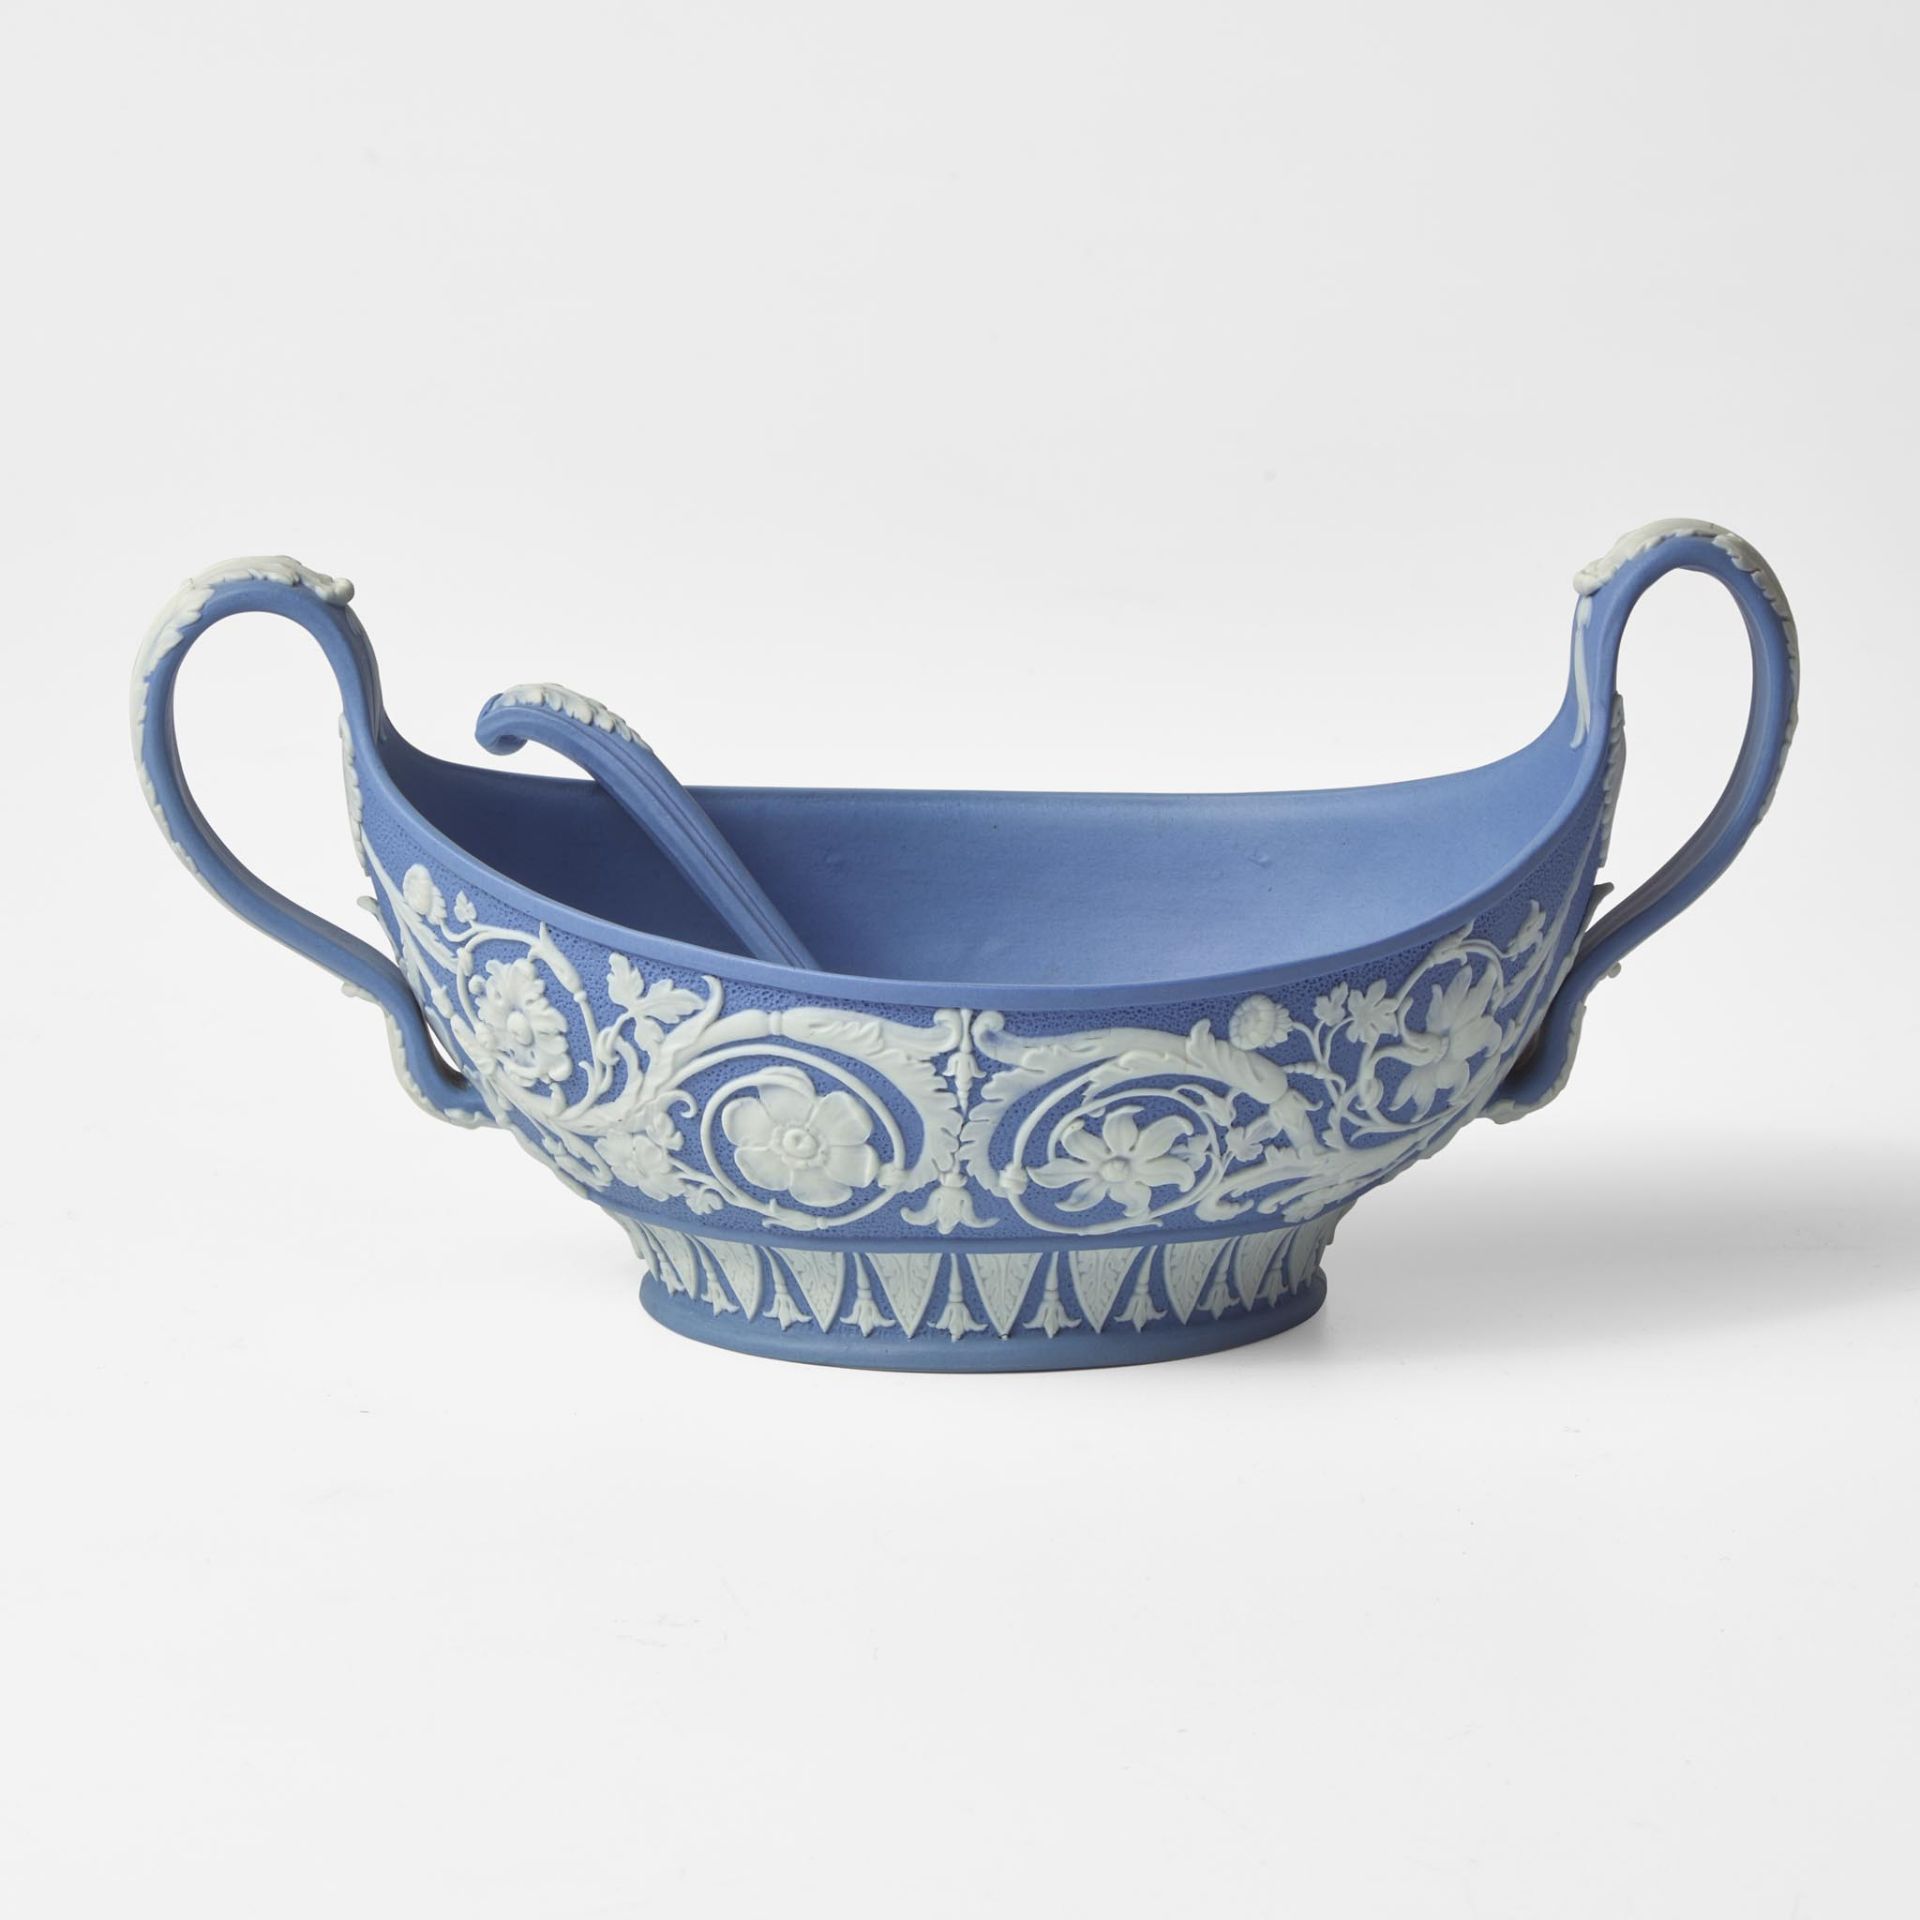 A Wedgwood Solid Blue Jasperware Handled Bowl and Spoon UK, 1780s